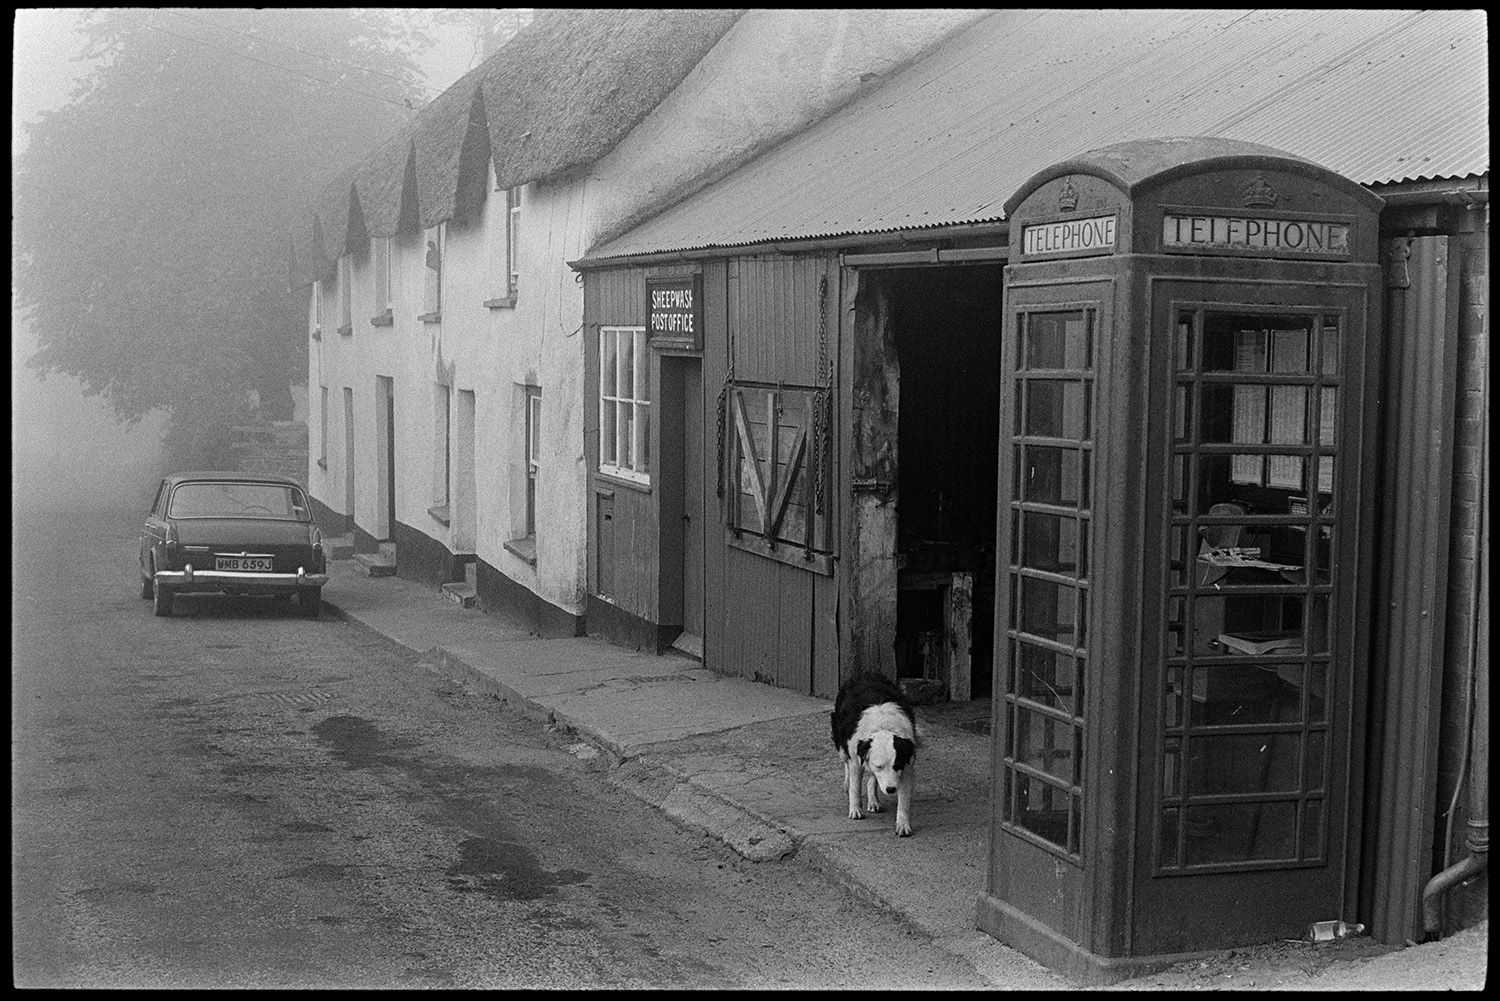 Street scenes with children, car and telephone kiosk. 
[A dog walking past a telephone box and Sheepwash Post Office, at Sheepwash. Thatched cottages and a car are visible further along the street.]